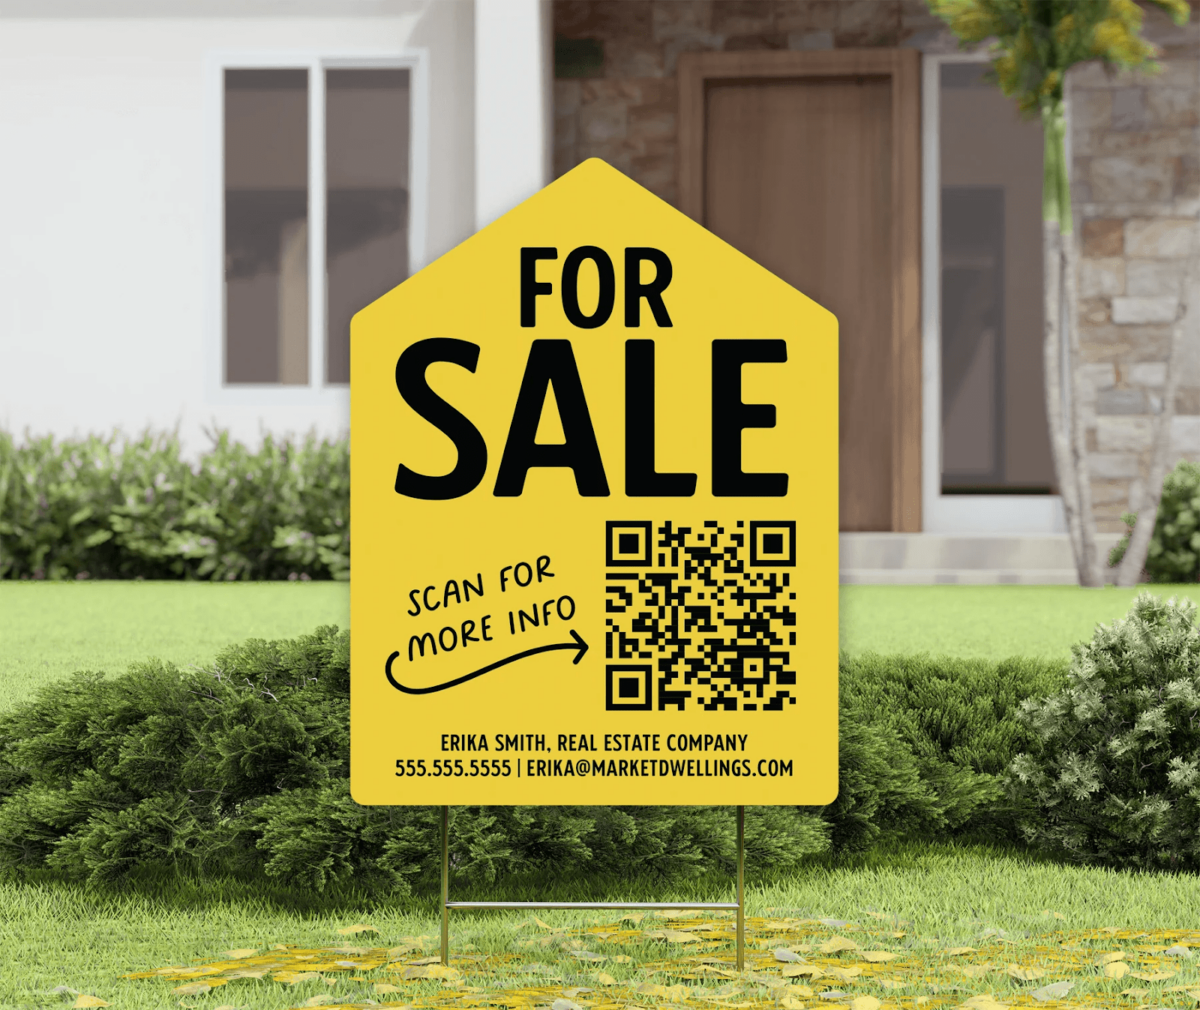 A yellow for sale sign with a QR code